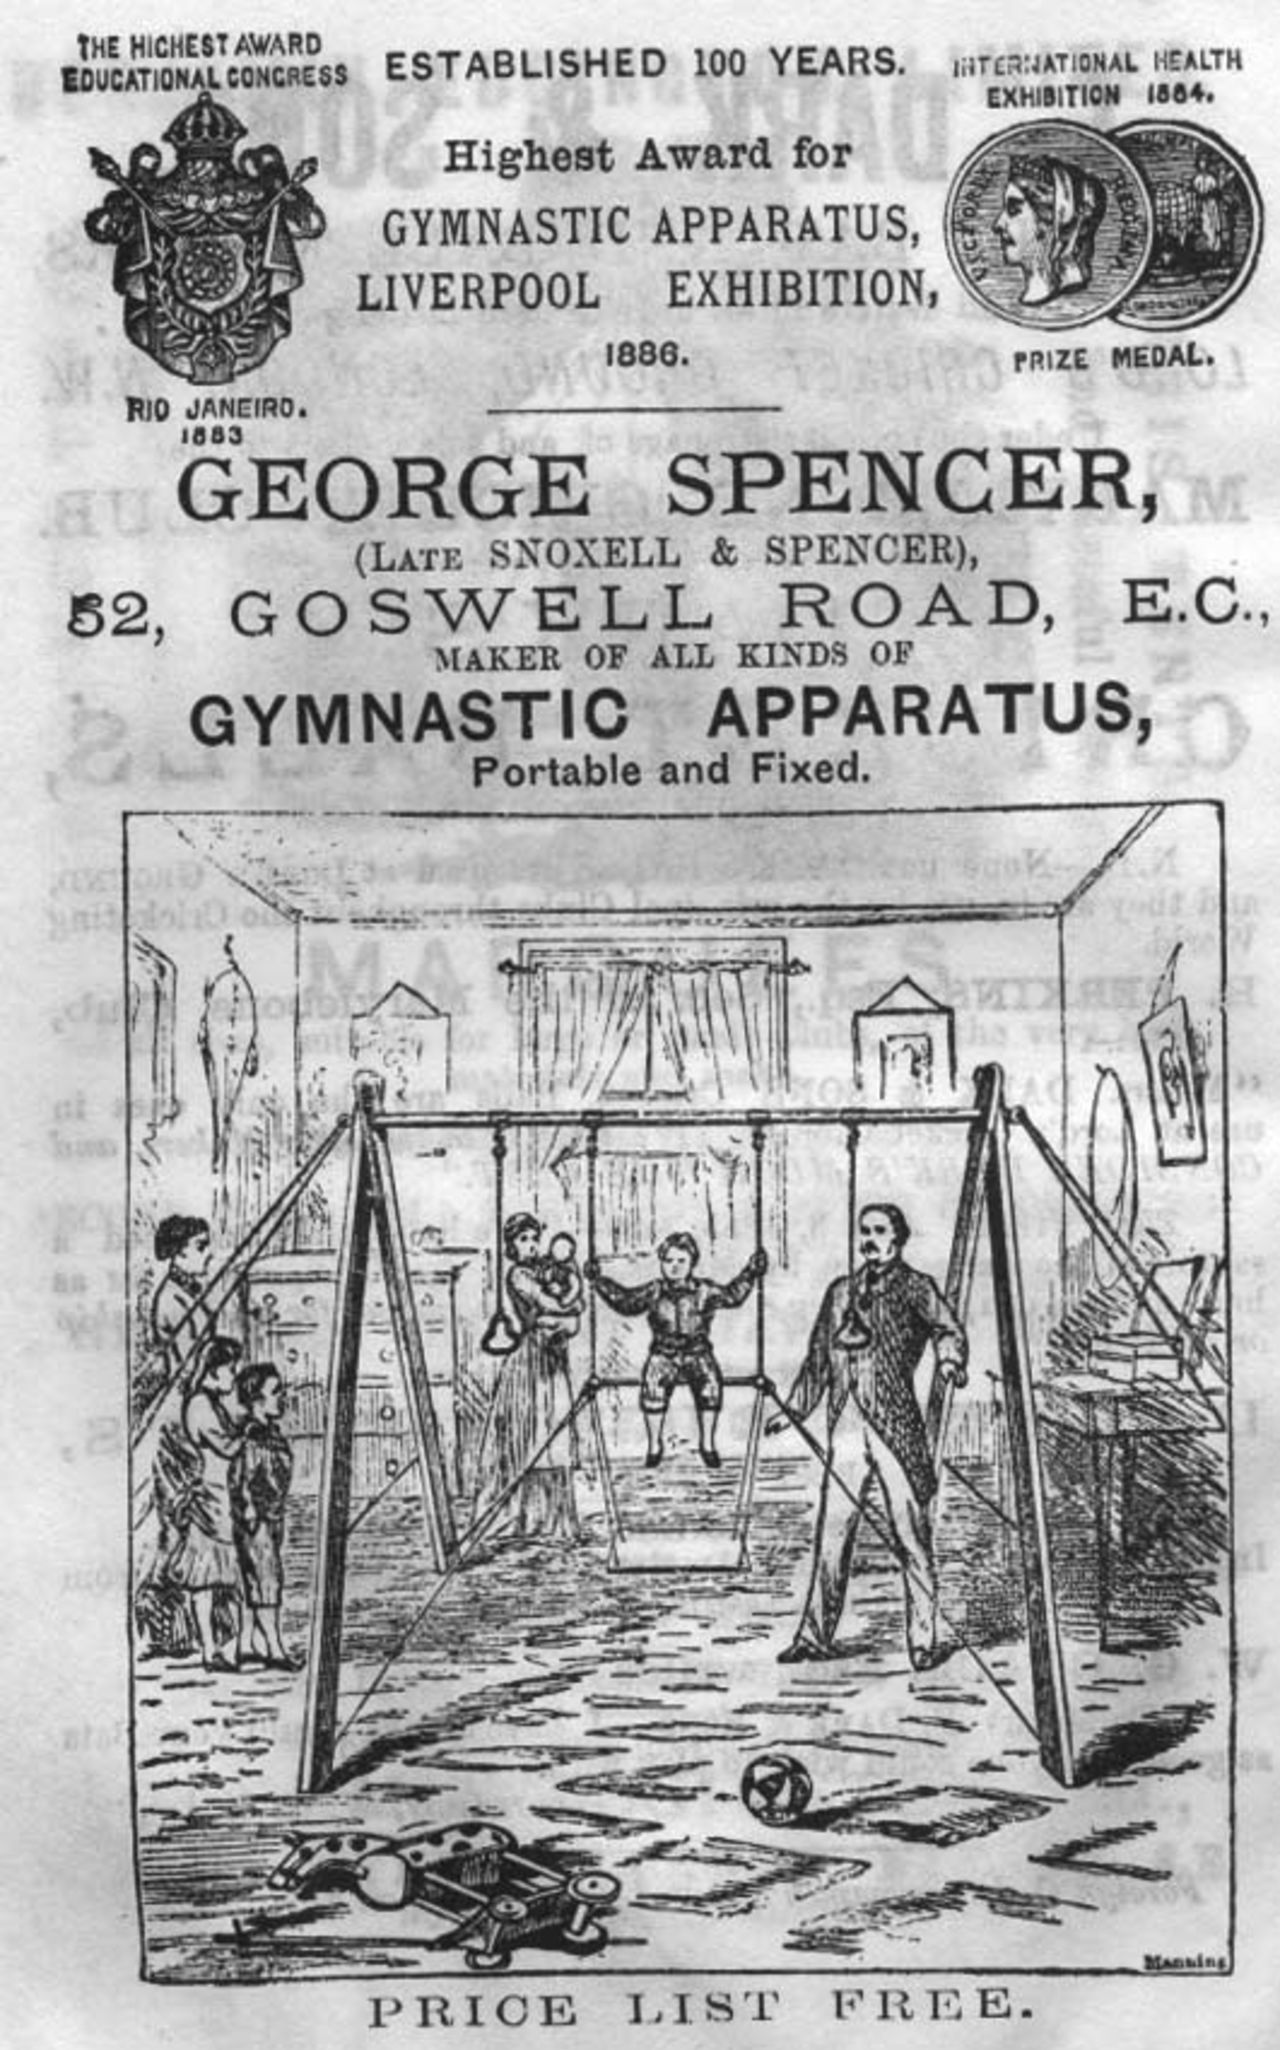 An advertisement for George Spencer's  gymnastic apparatus in the 1887 edition of the Wisden Cricketers' Almanack